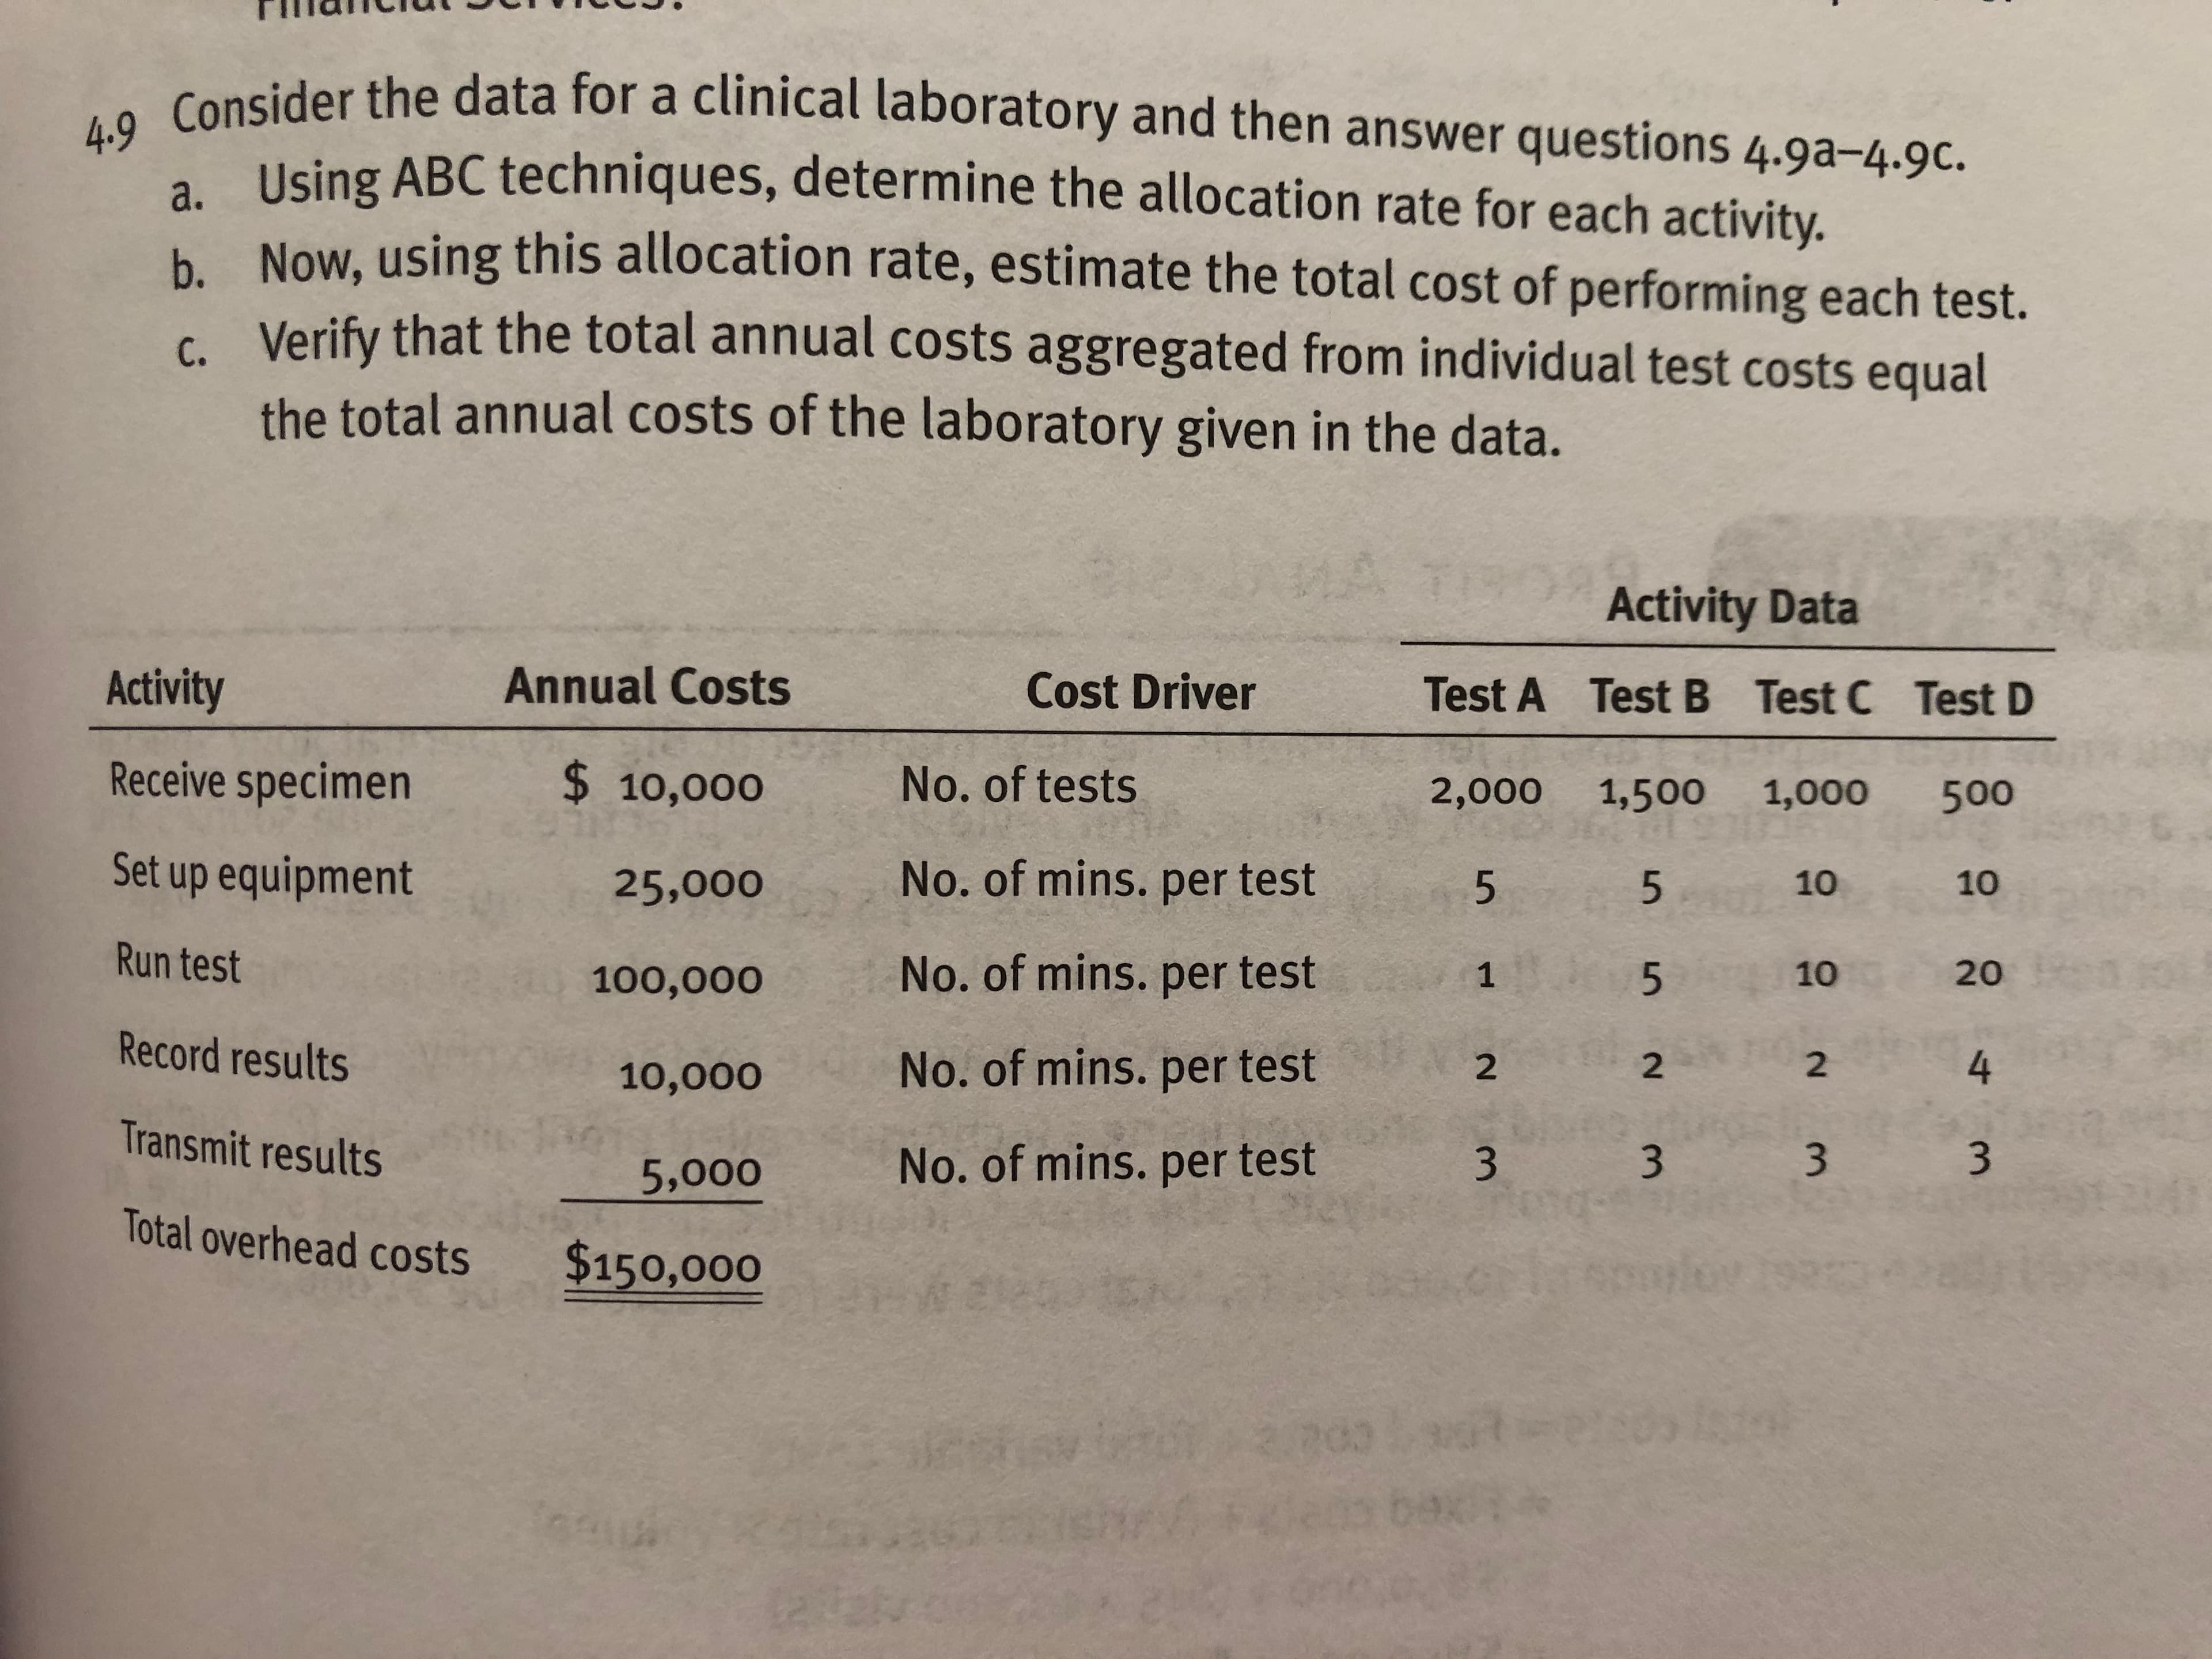 Consider the data for a clinical laboratory and then answer questions 4.9a-4.9c.
Using ABC techniques, determine the allocation rate for each activity.
Now, using this allocation rate, estimate the total cost of performing each test.
Verify that the total annual costs aggregated from individual test costs equal
the total annual costs of the laboratory given in the data.
b.
Activity Data
Test A Test B Test C Test D
2,000 1,500 1,000 500
Cost Driver
Annual Costs
Activity
Receive specimen
Set up equipment
Run test
Record results
No. of tests
No. of mins. per test
No. of mins. per test
No. of mins. per test
No. of mins. per test
$ 10,000
25,000
100,000
10,000
Transmit results5,000
Total overhead costs $150,000
1010
20
4
3
10
1
2
2
2
3
